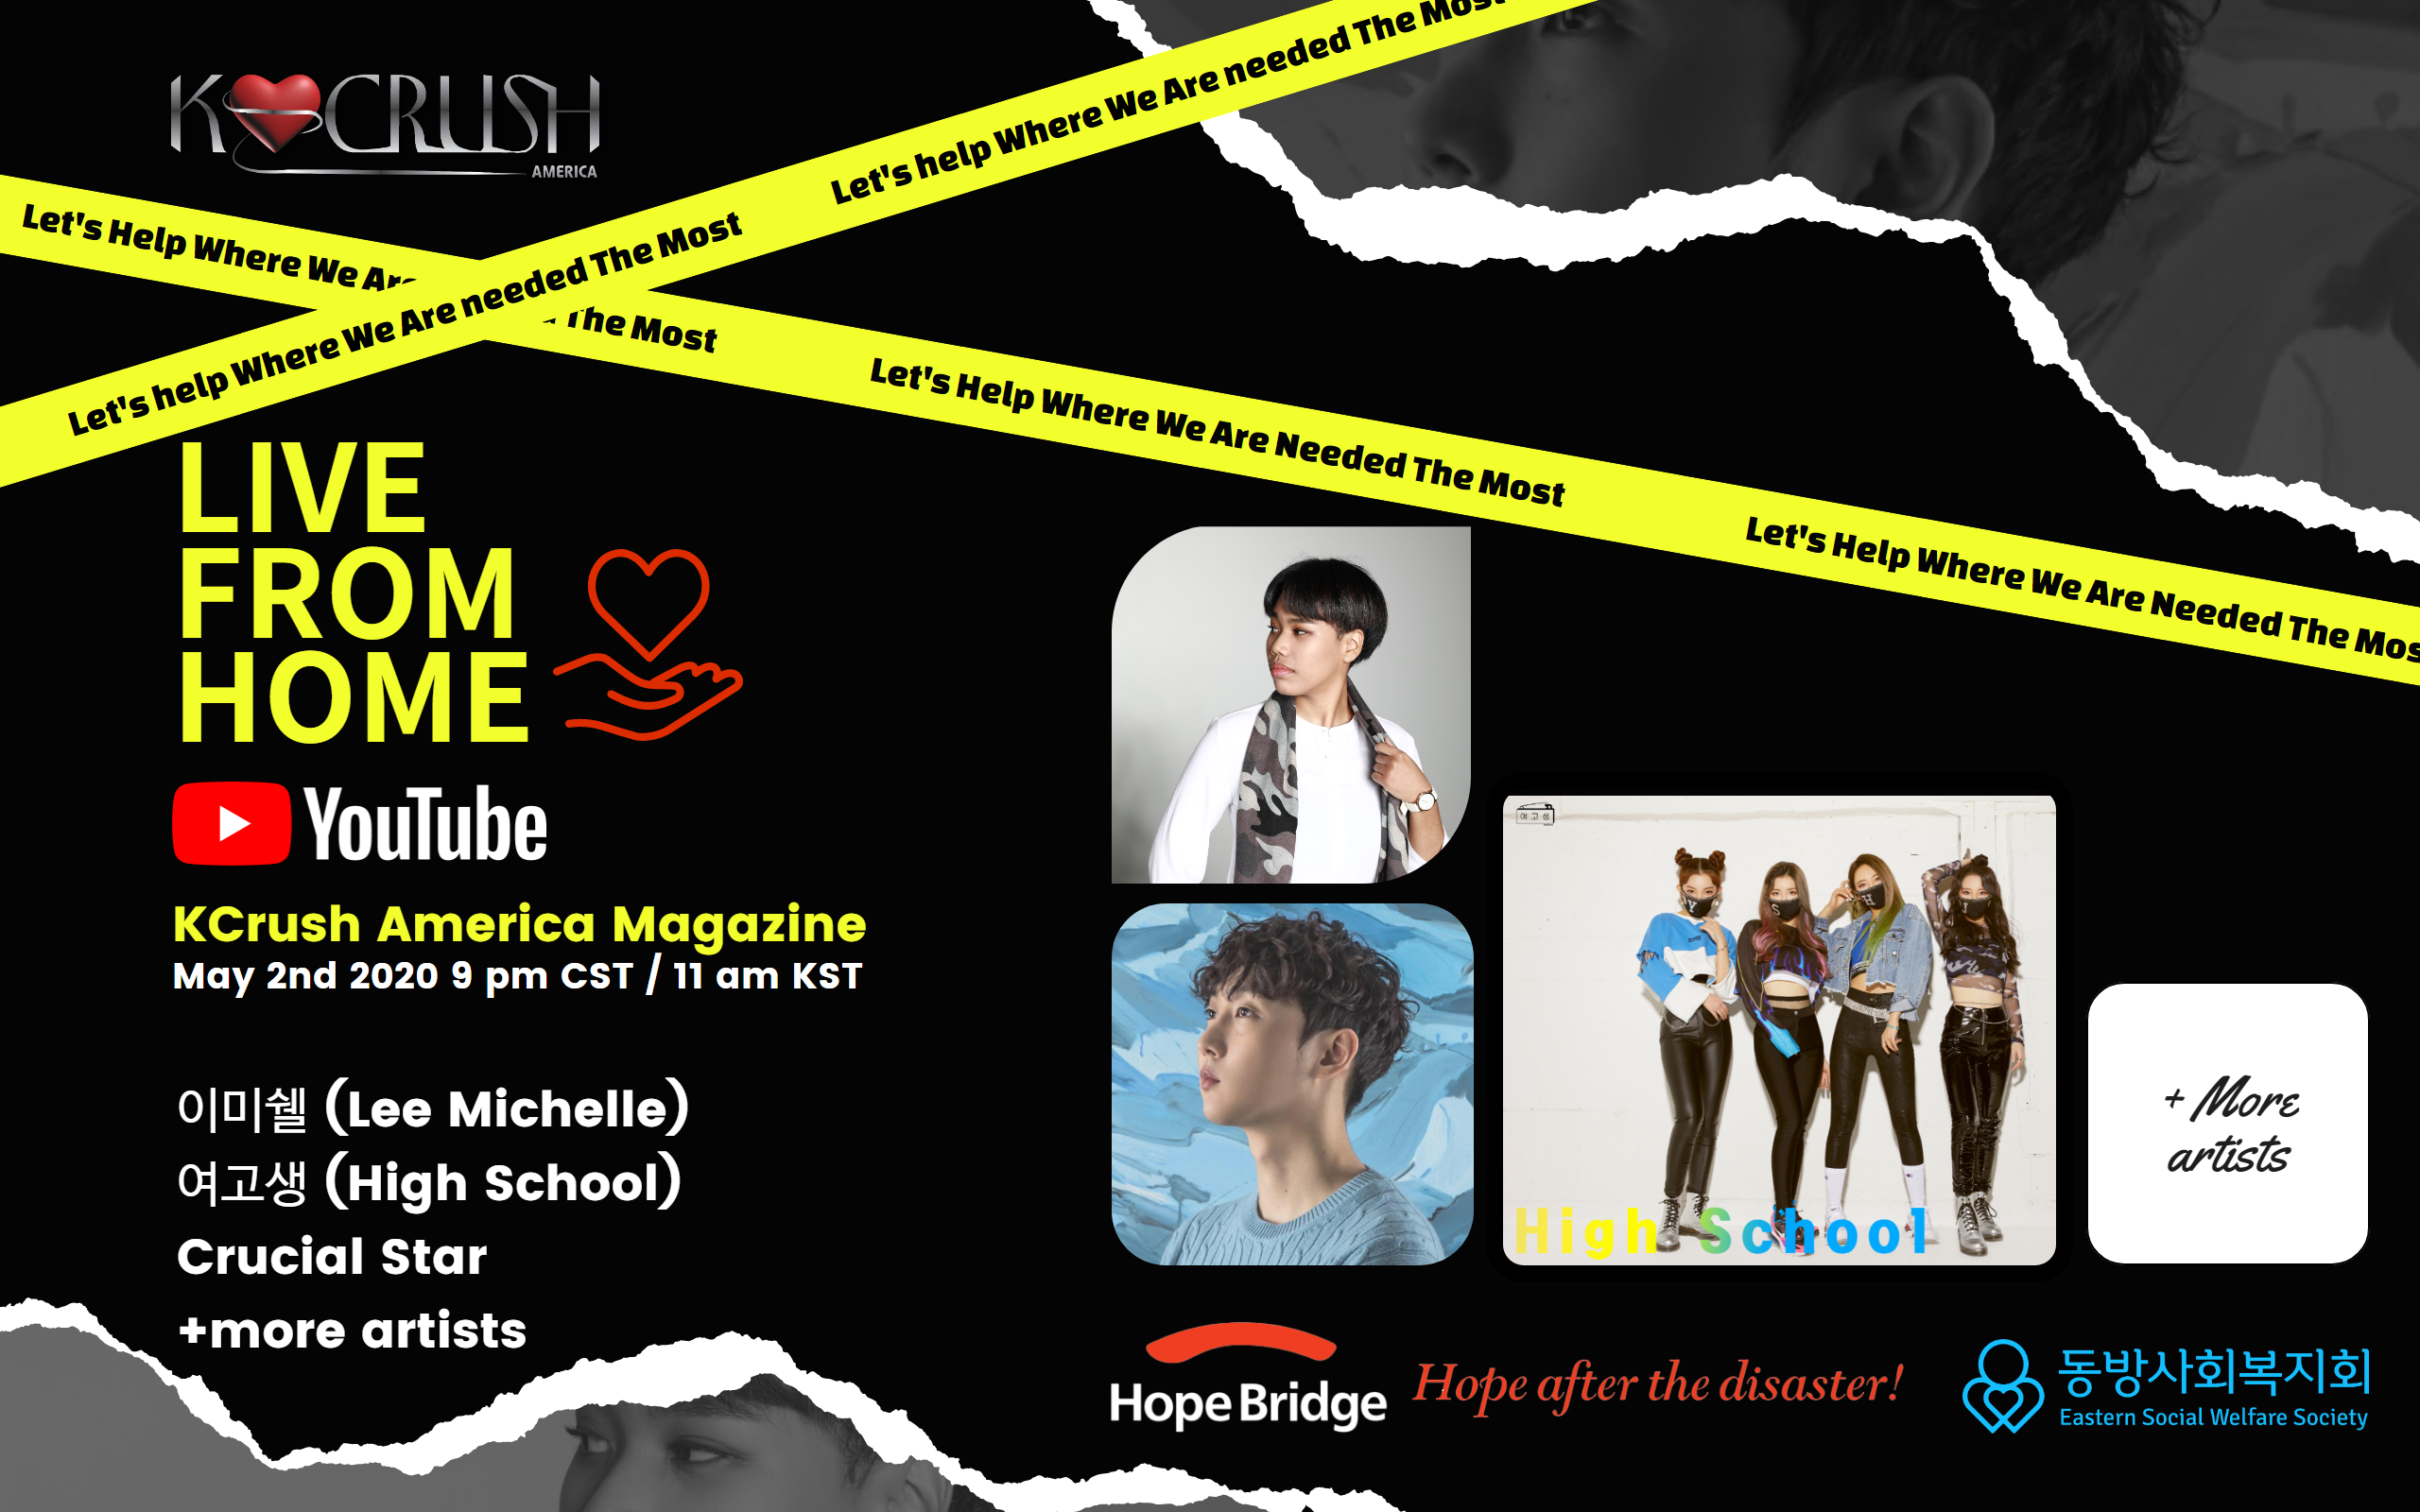 Kcrush America Magazine Announces Live From Home YouTube Event